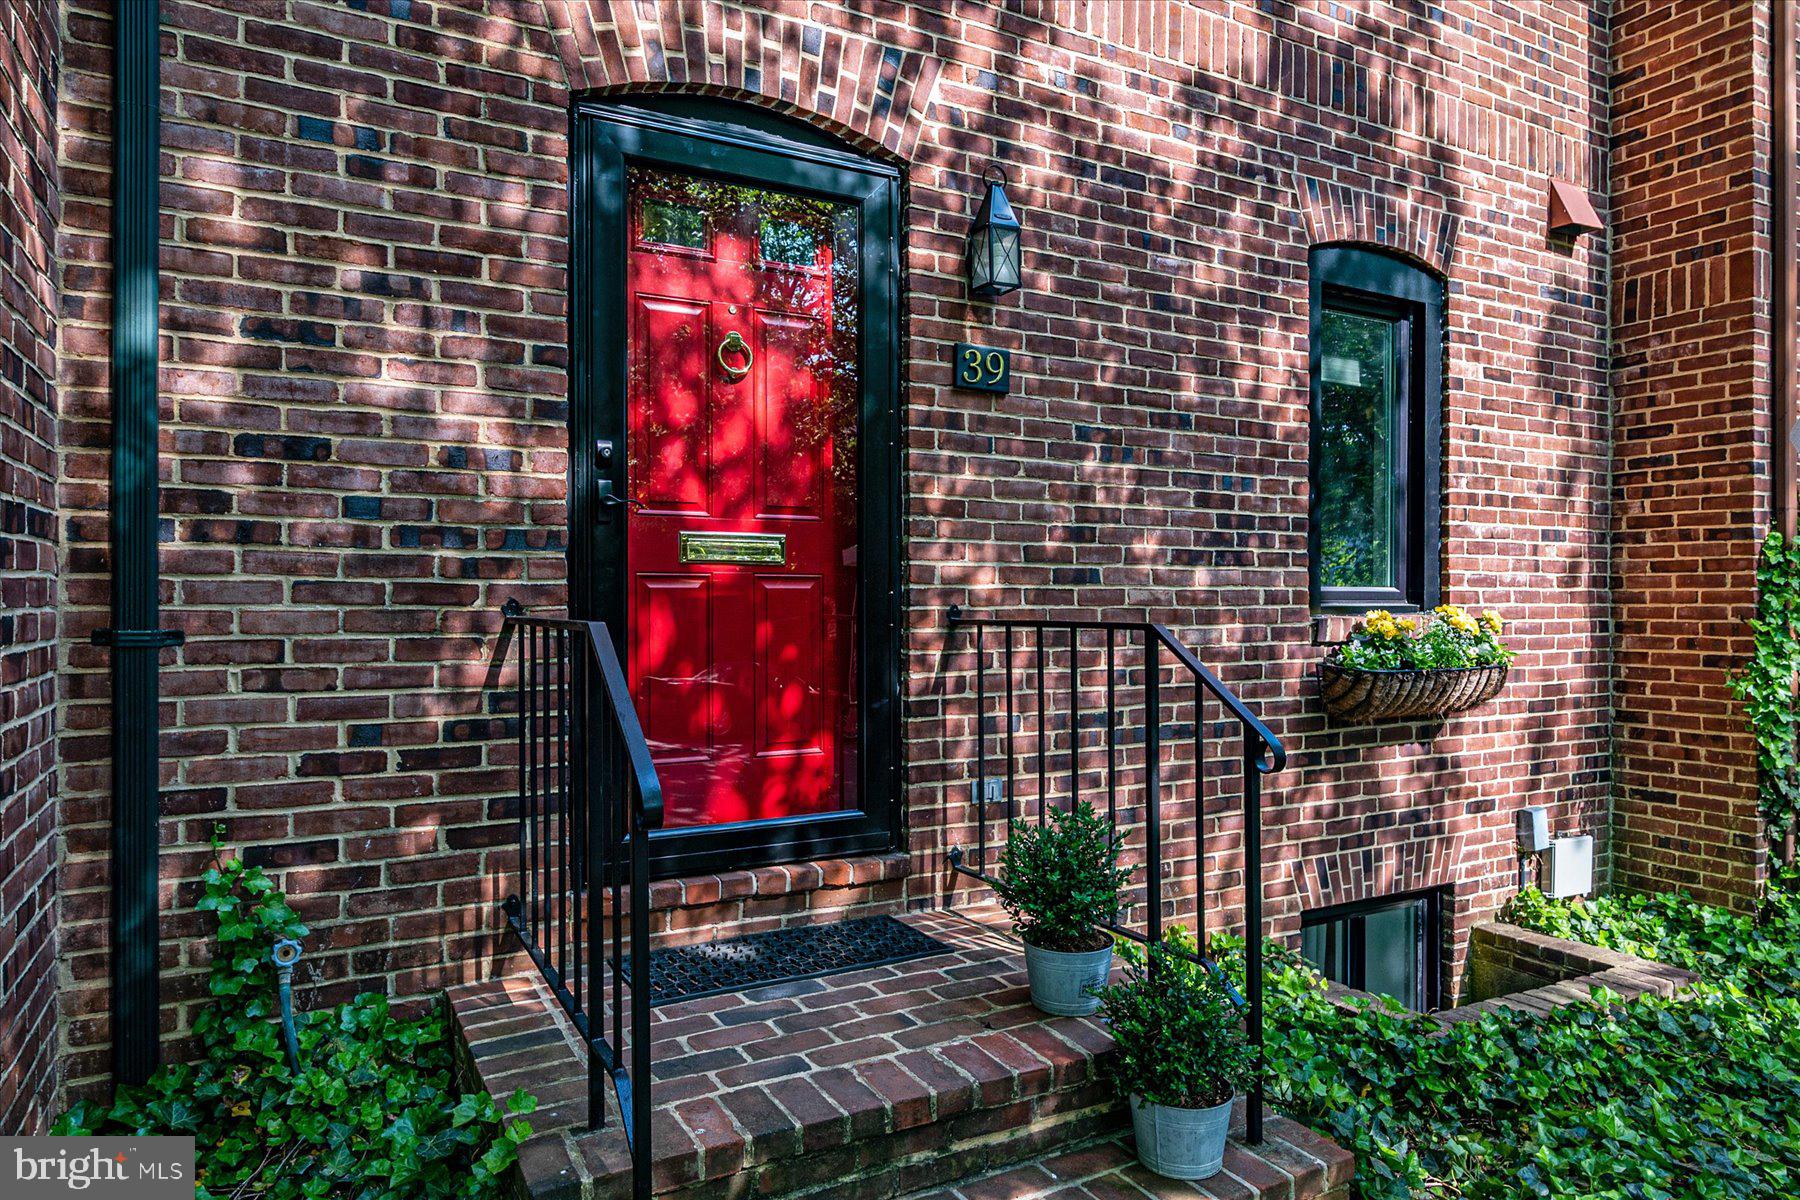 a view of a brick building with a red door